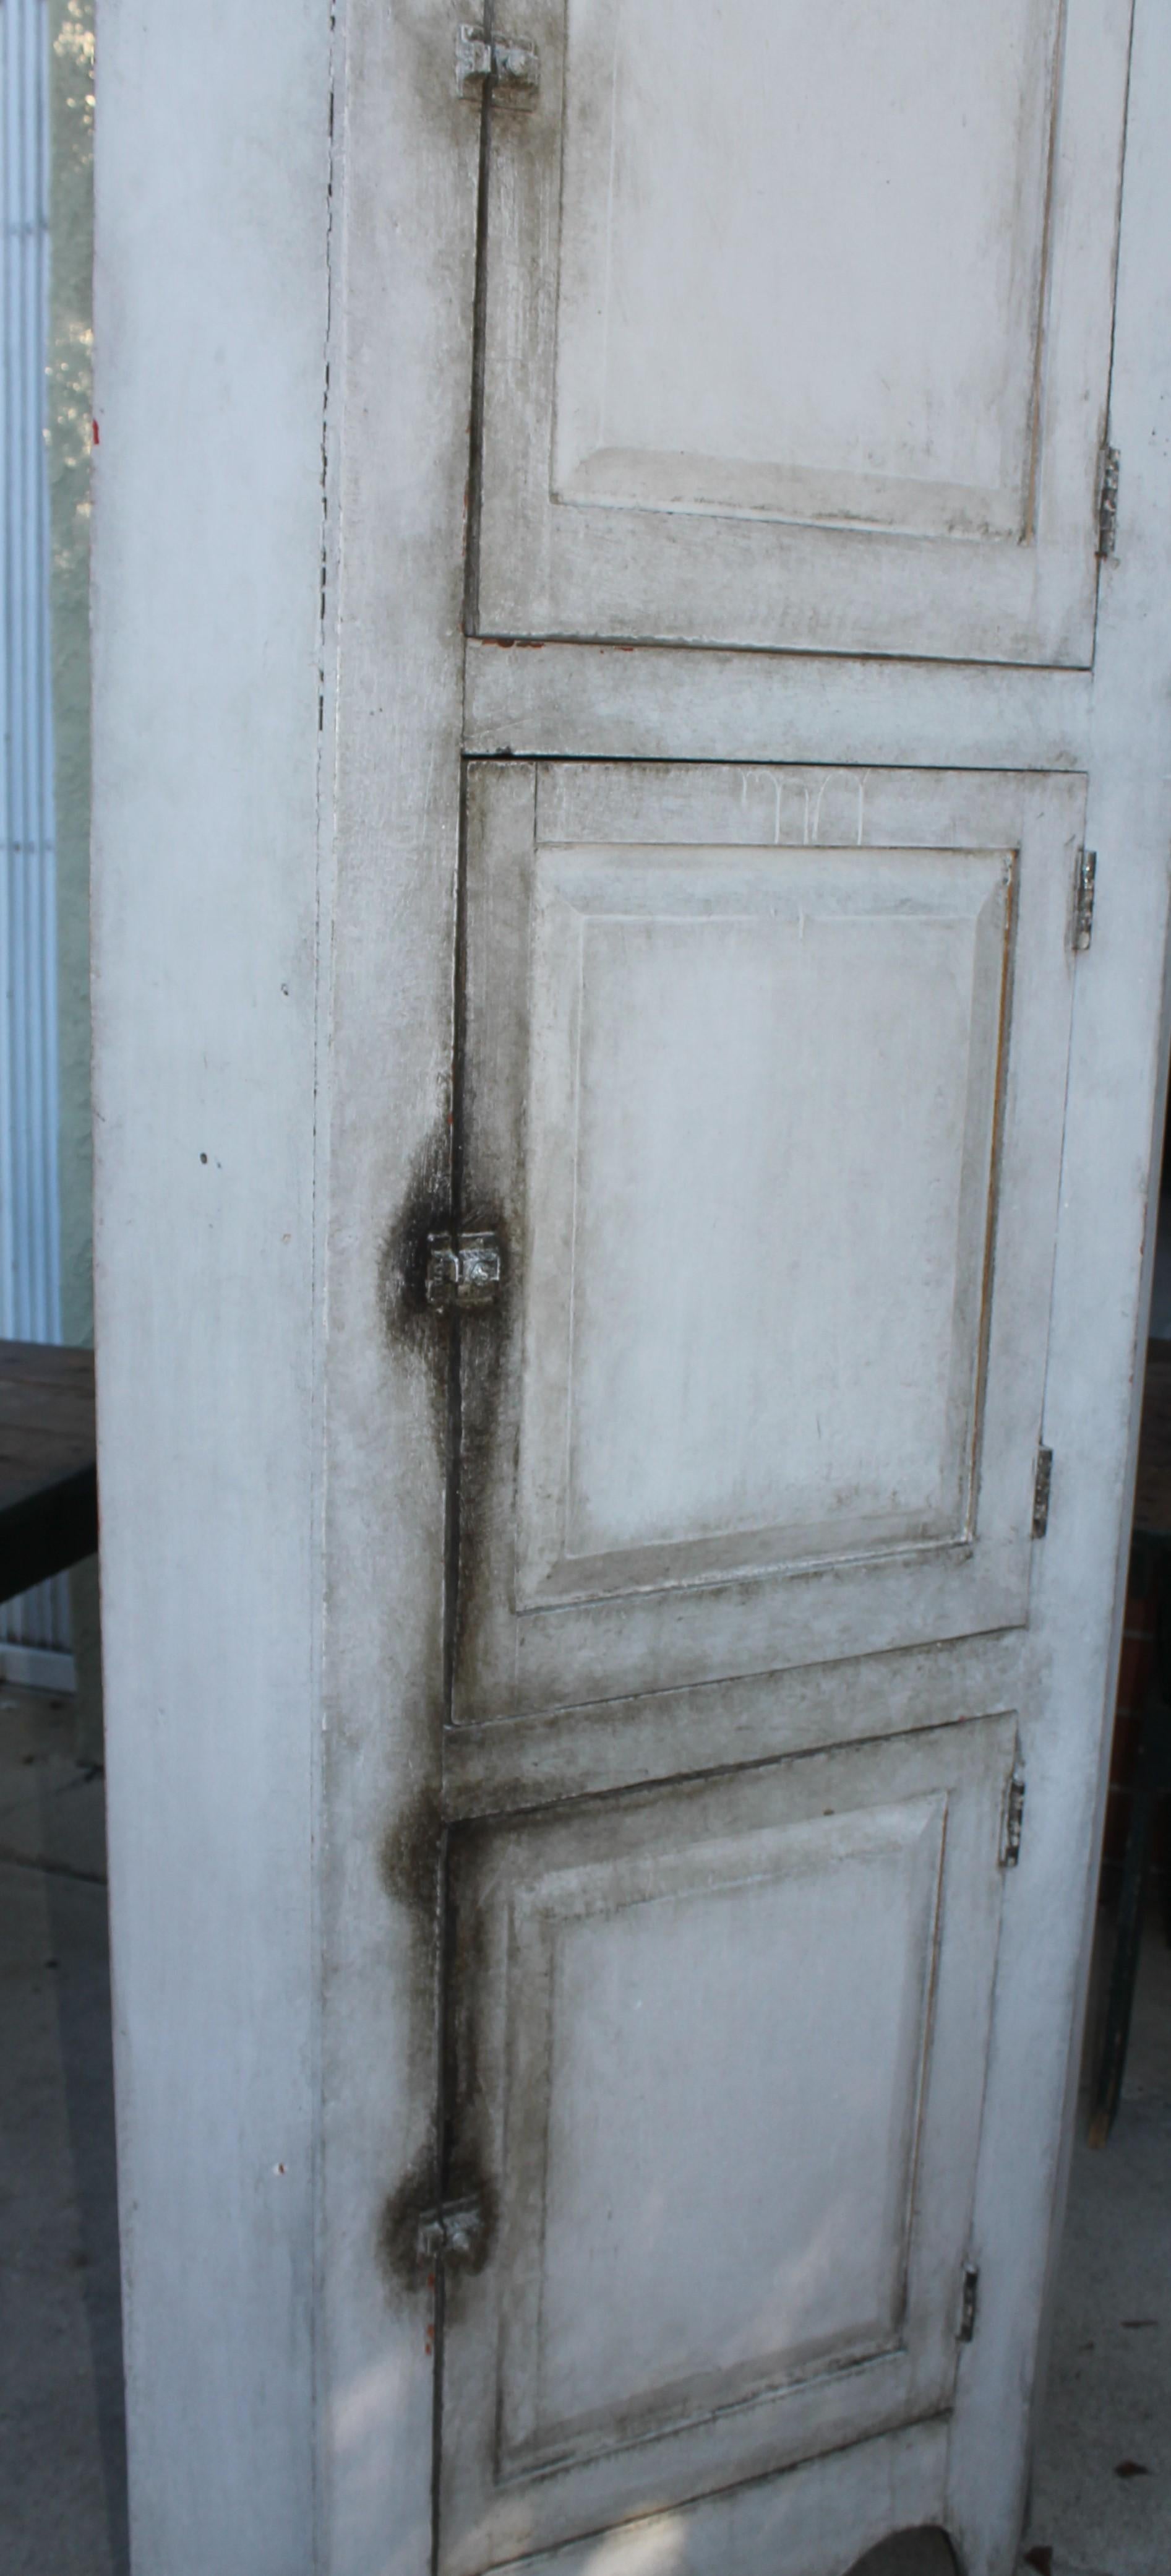 This amazing 19thc three door corner cupboard is in great condition and good and sturdy condition.This cupboard is over painted and has a dusty rose painted interior. The backing is in old wainscoting.
The hardware is all original and locks up